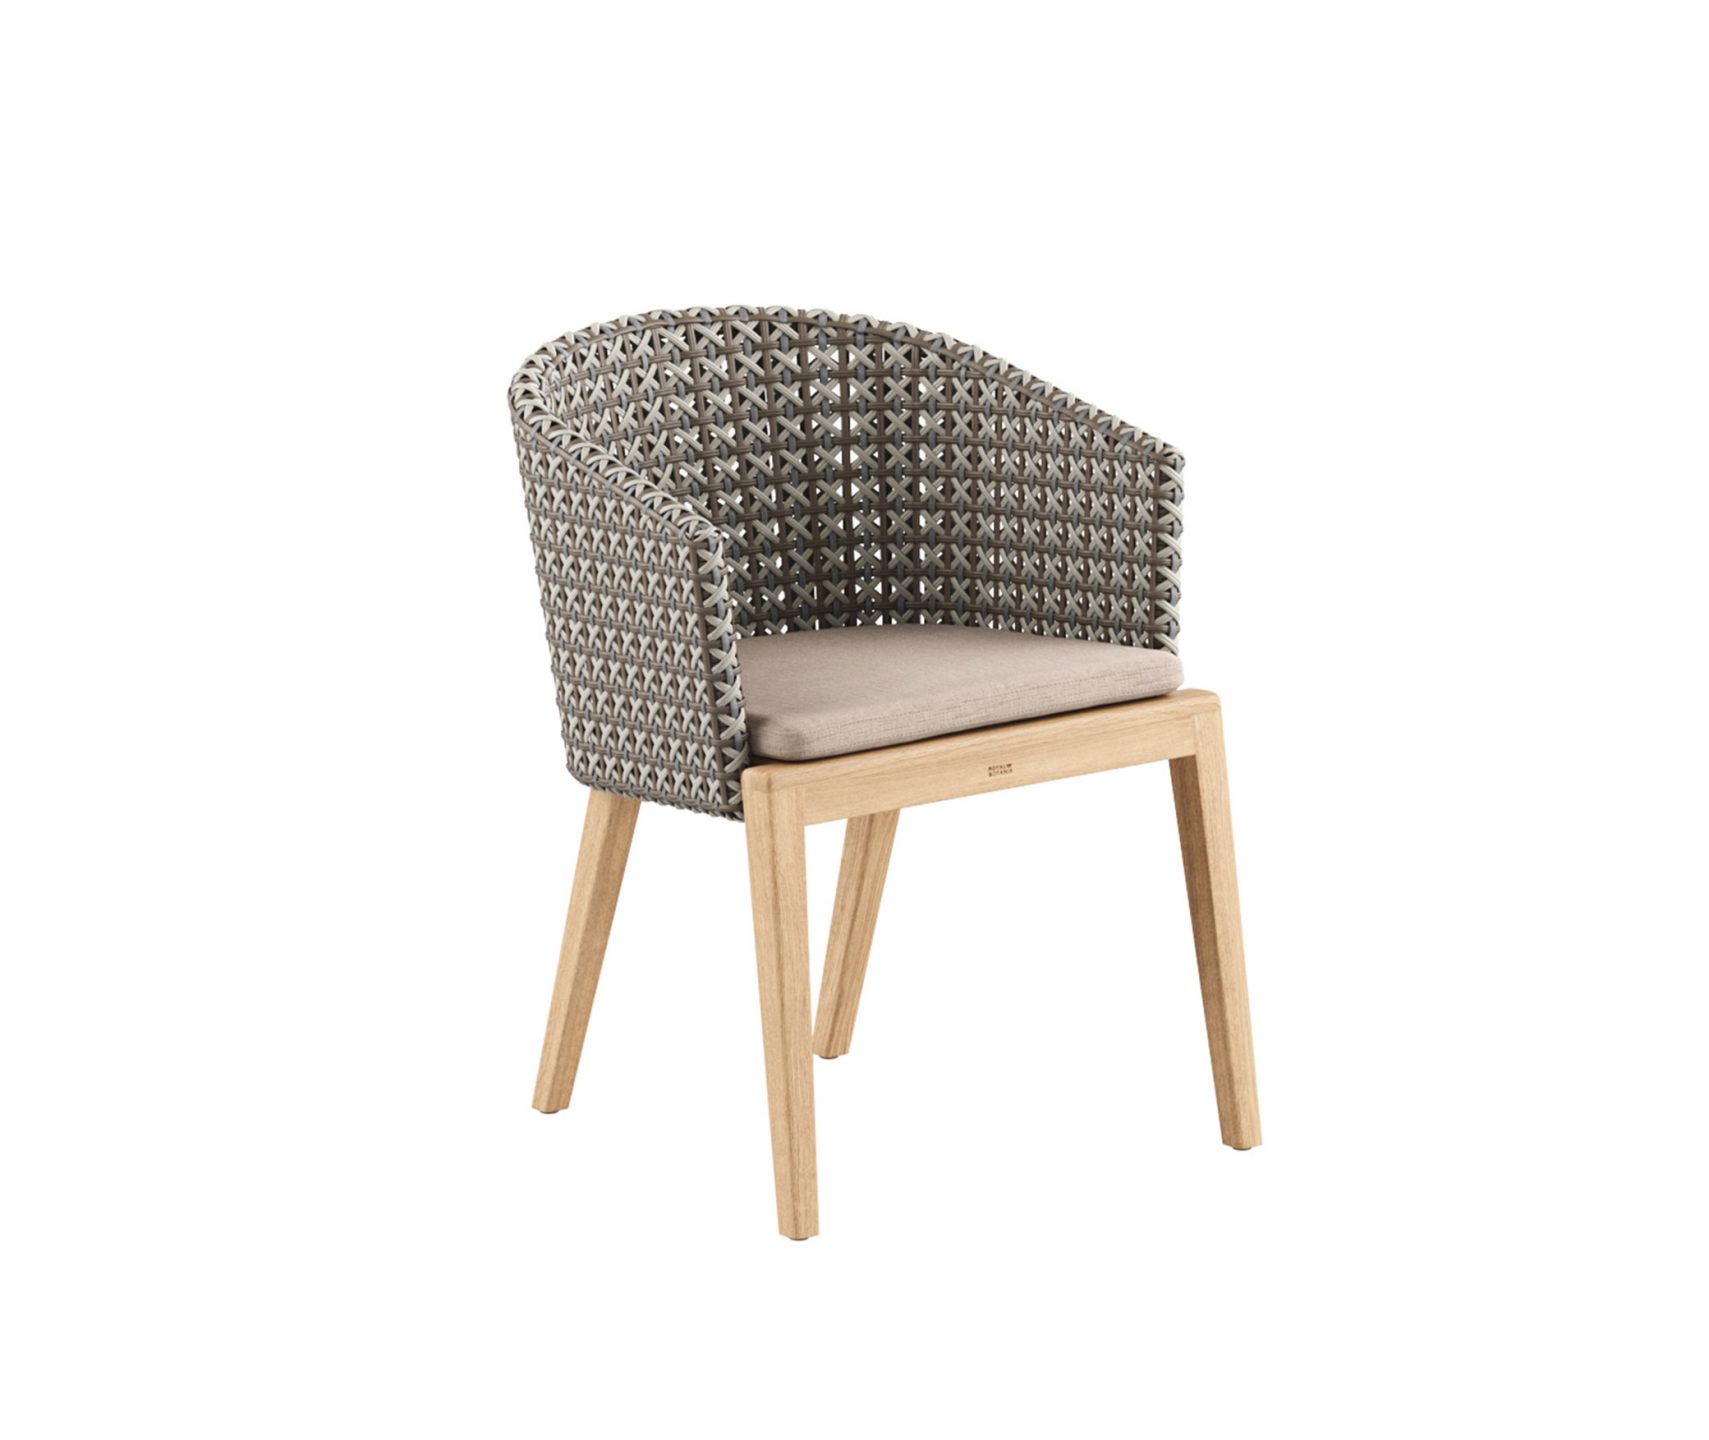 Royal-Botania_Calypso-Chair-Woven-Back_int_products